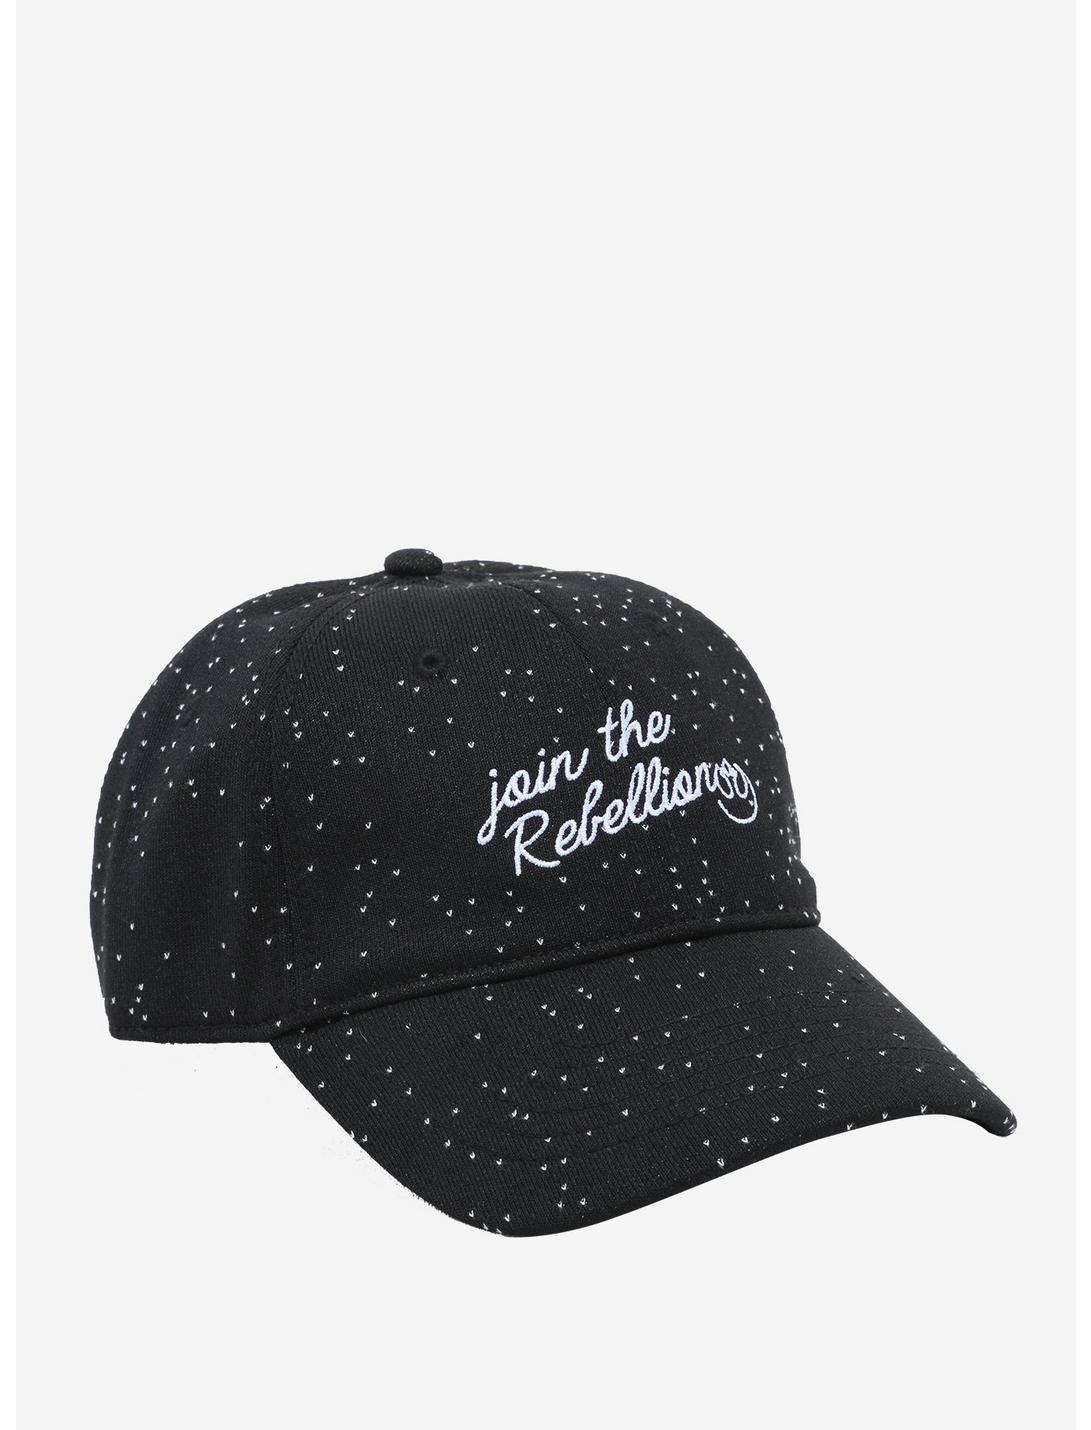 Star Wars Join The Rebellion Dad Cap, , hi-res